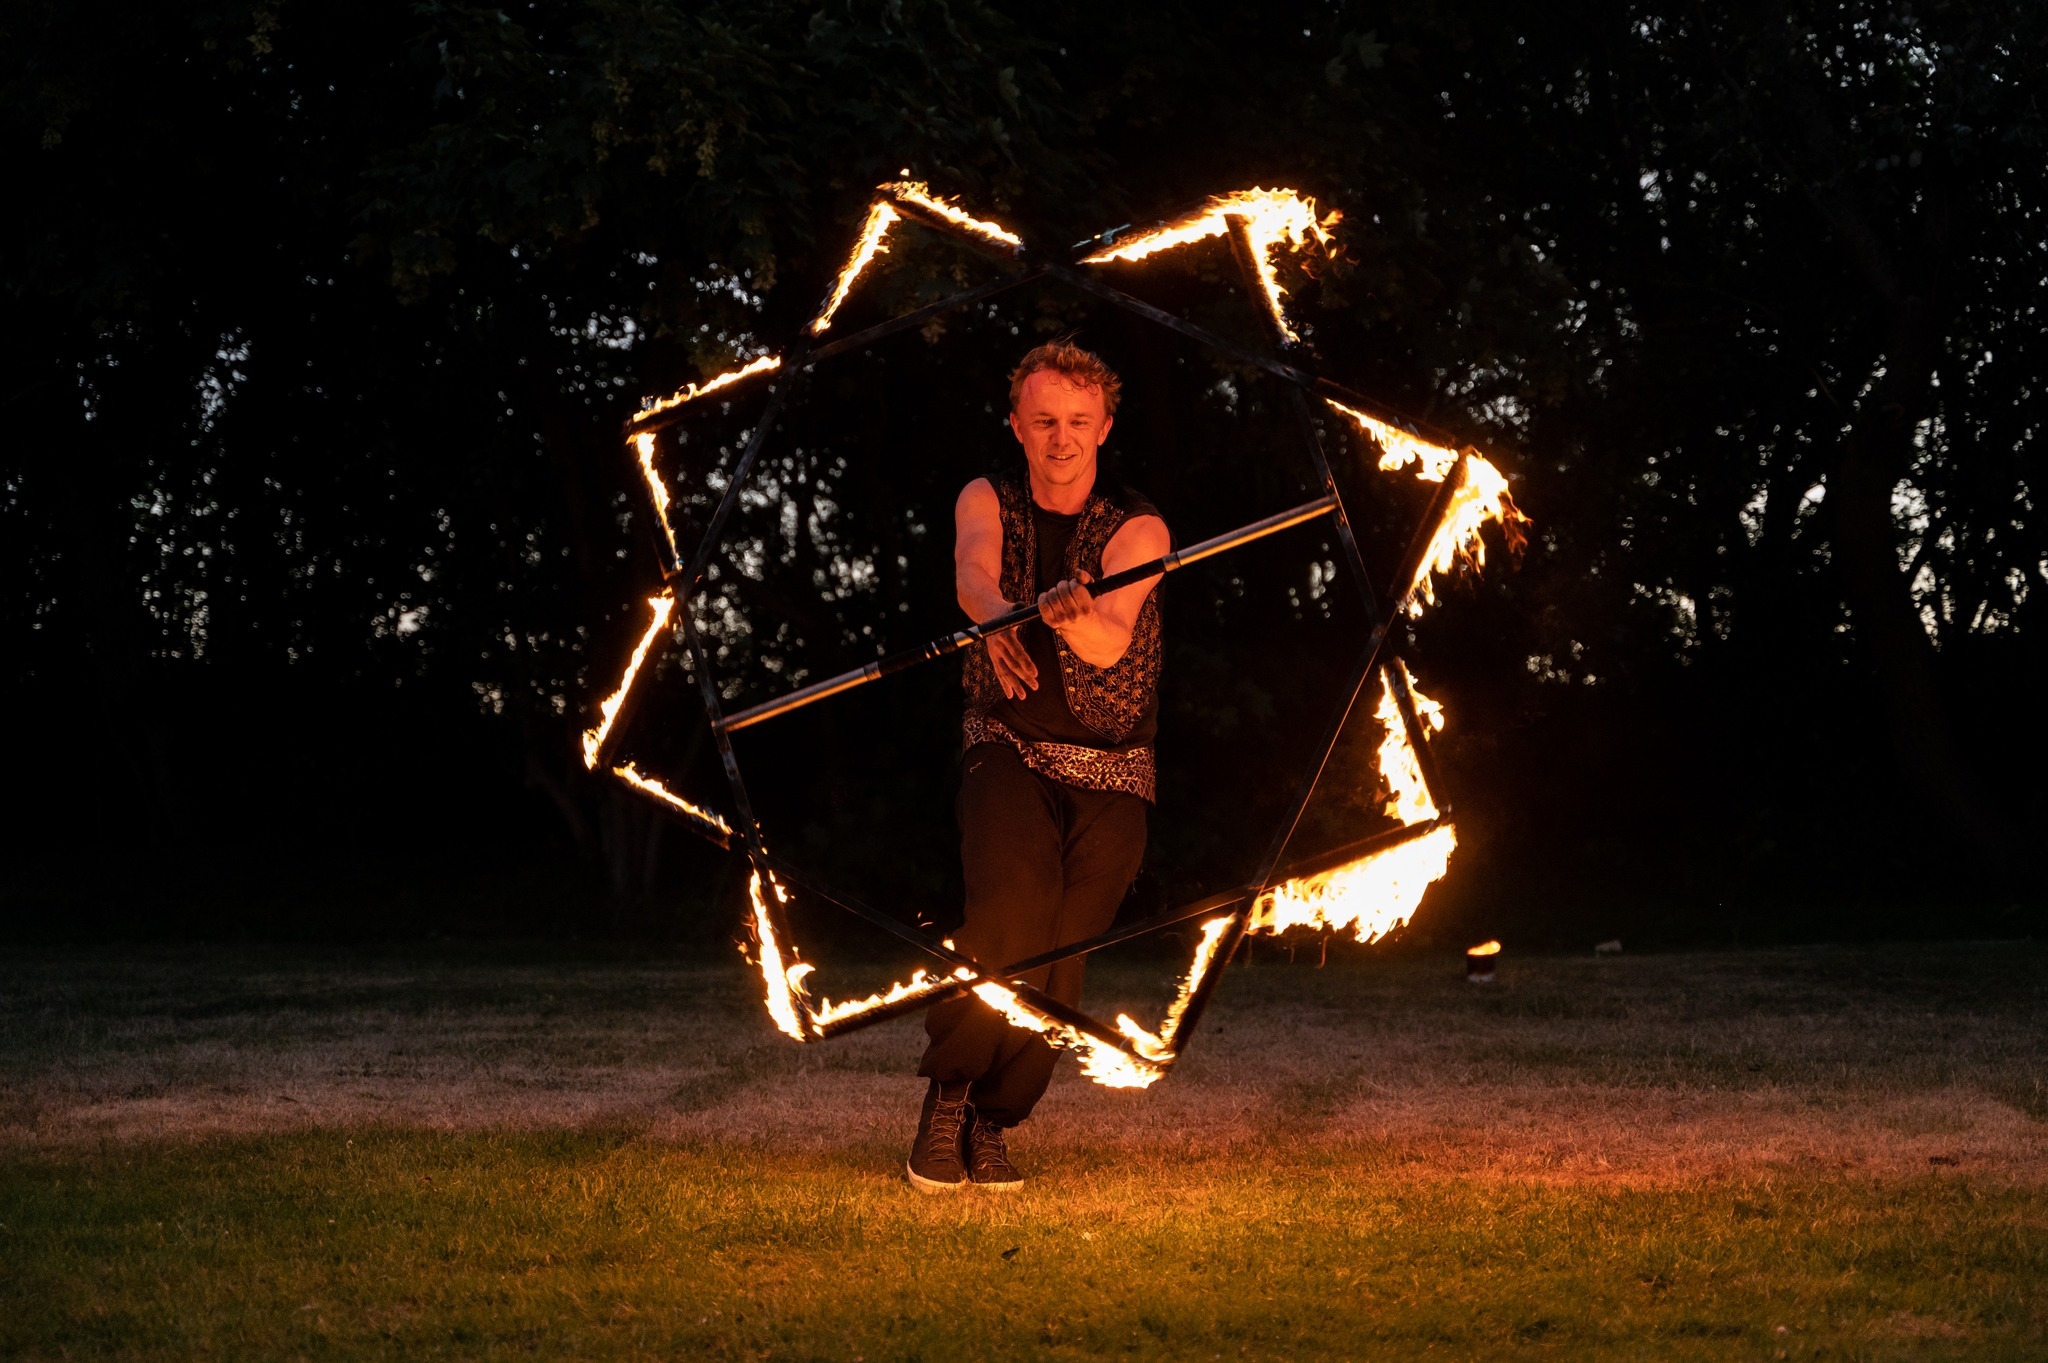 Szymon performing with a fire prop